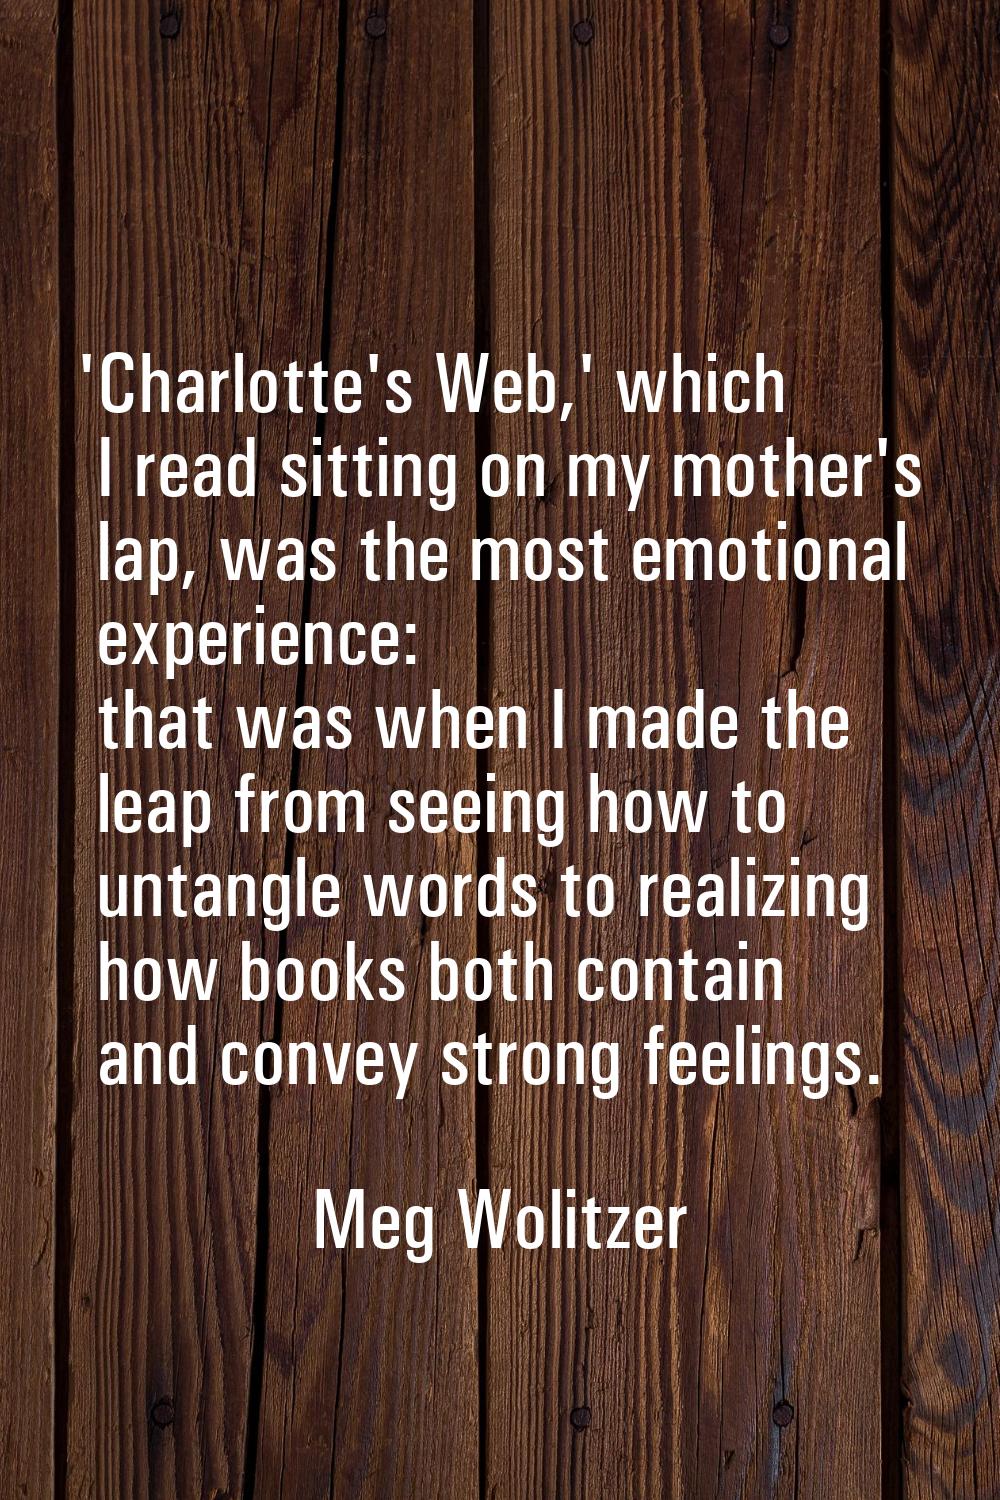 'Charlotte's Web,' which I read sitting on my mother's lap, was the most emotional experience: that